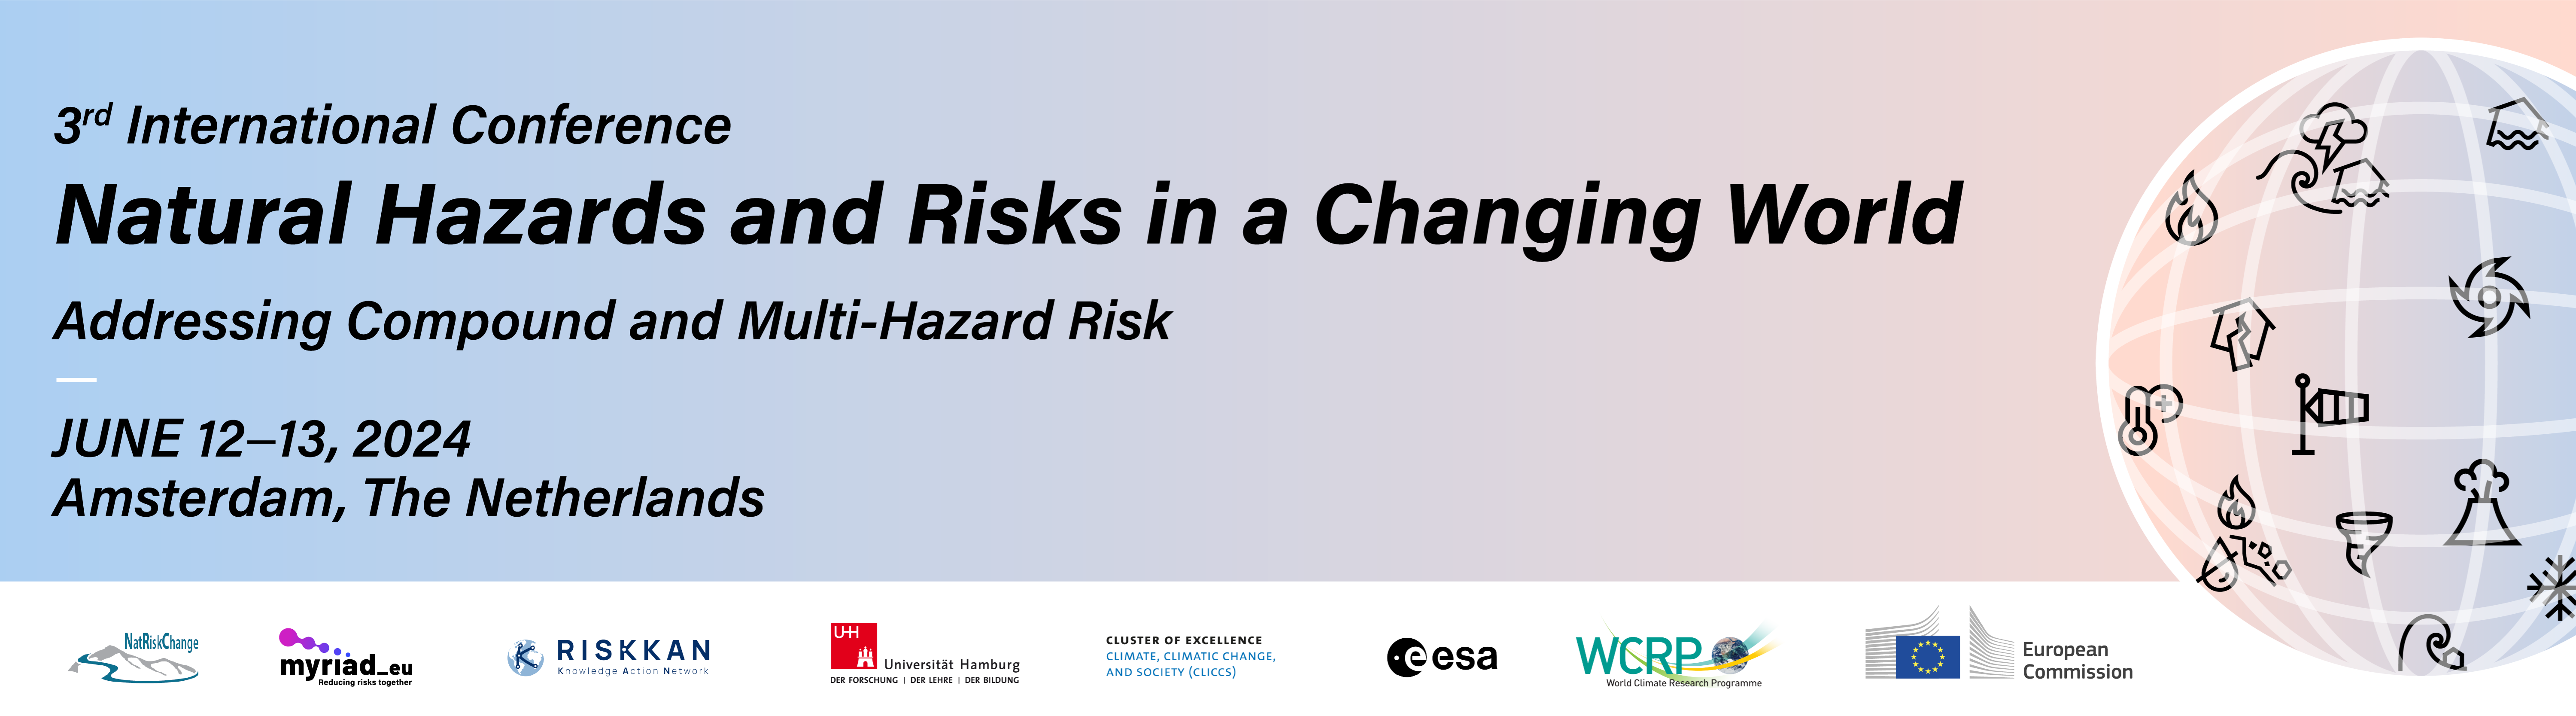 3rd International Conference on Natural Hazards and Risks in a Changing World: Addressing Compound and Multi-Hazard Risk